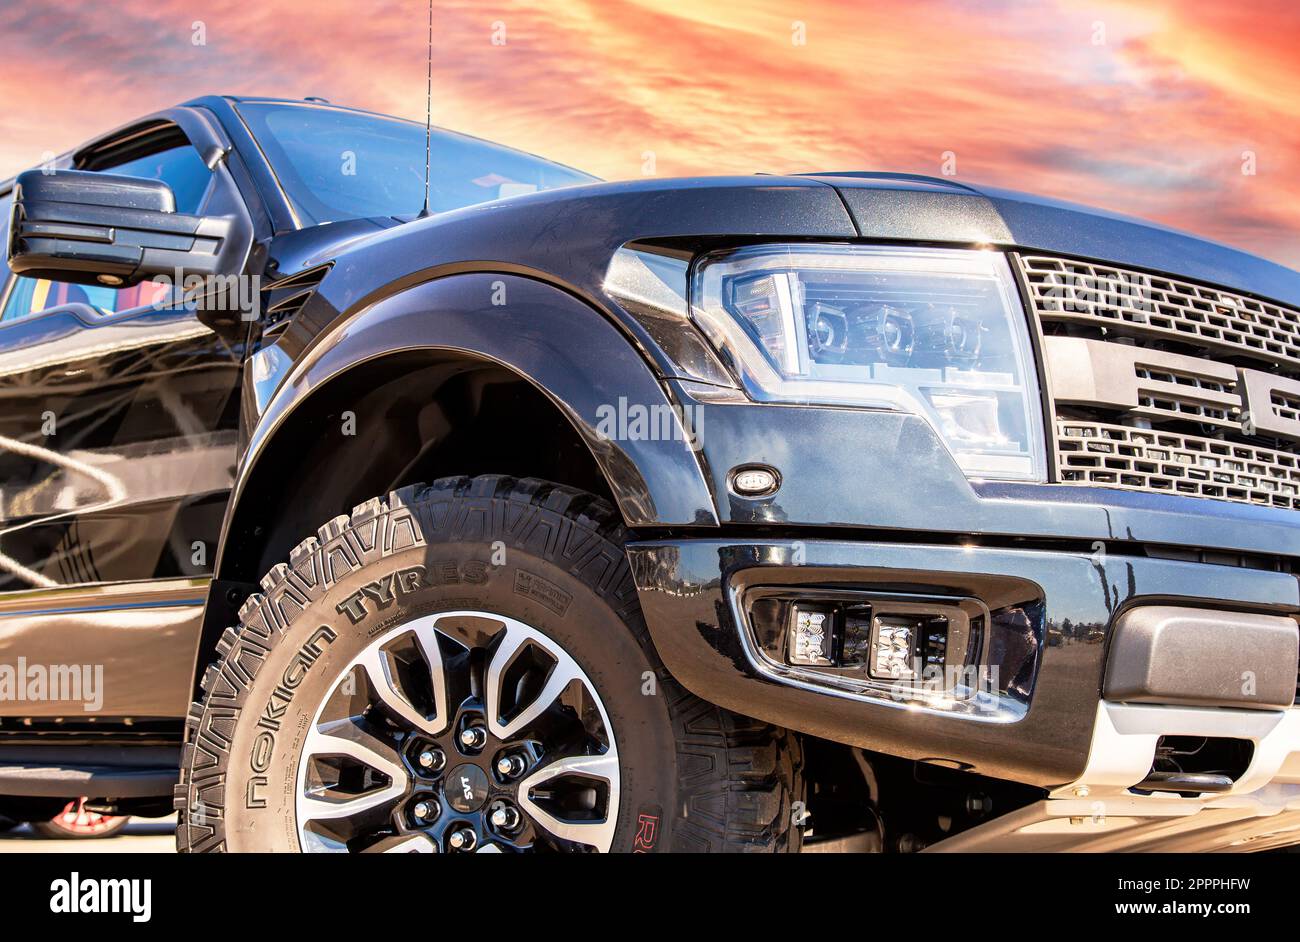 Samara, Russia - June 26, 2022: Off-road 4x4 Ford F-150 Raptor vehicle with all terrain tires Nokian Tyres against a sunset sky . Black all terrain ve Stock Photo